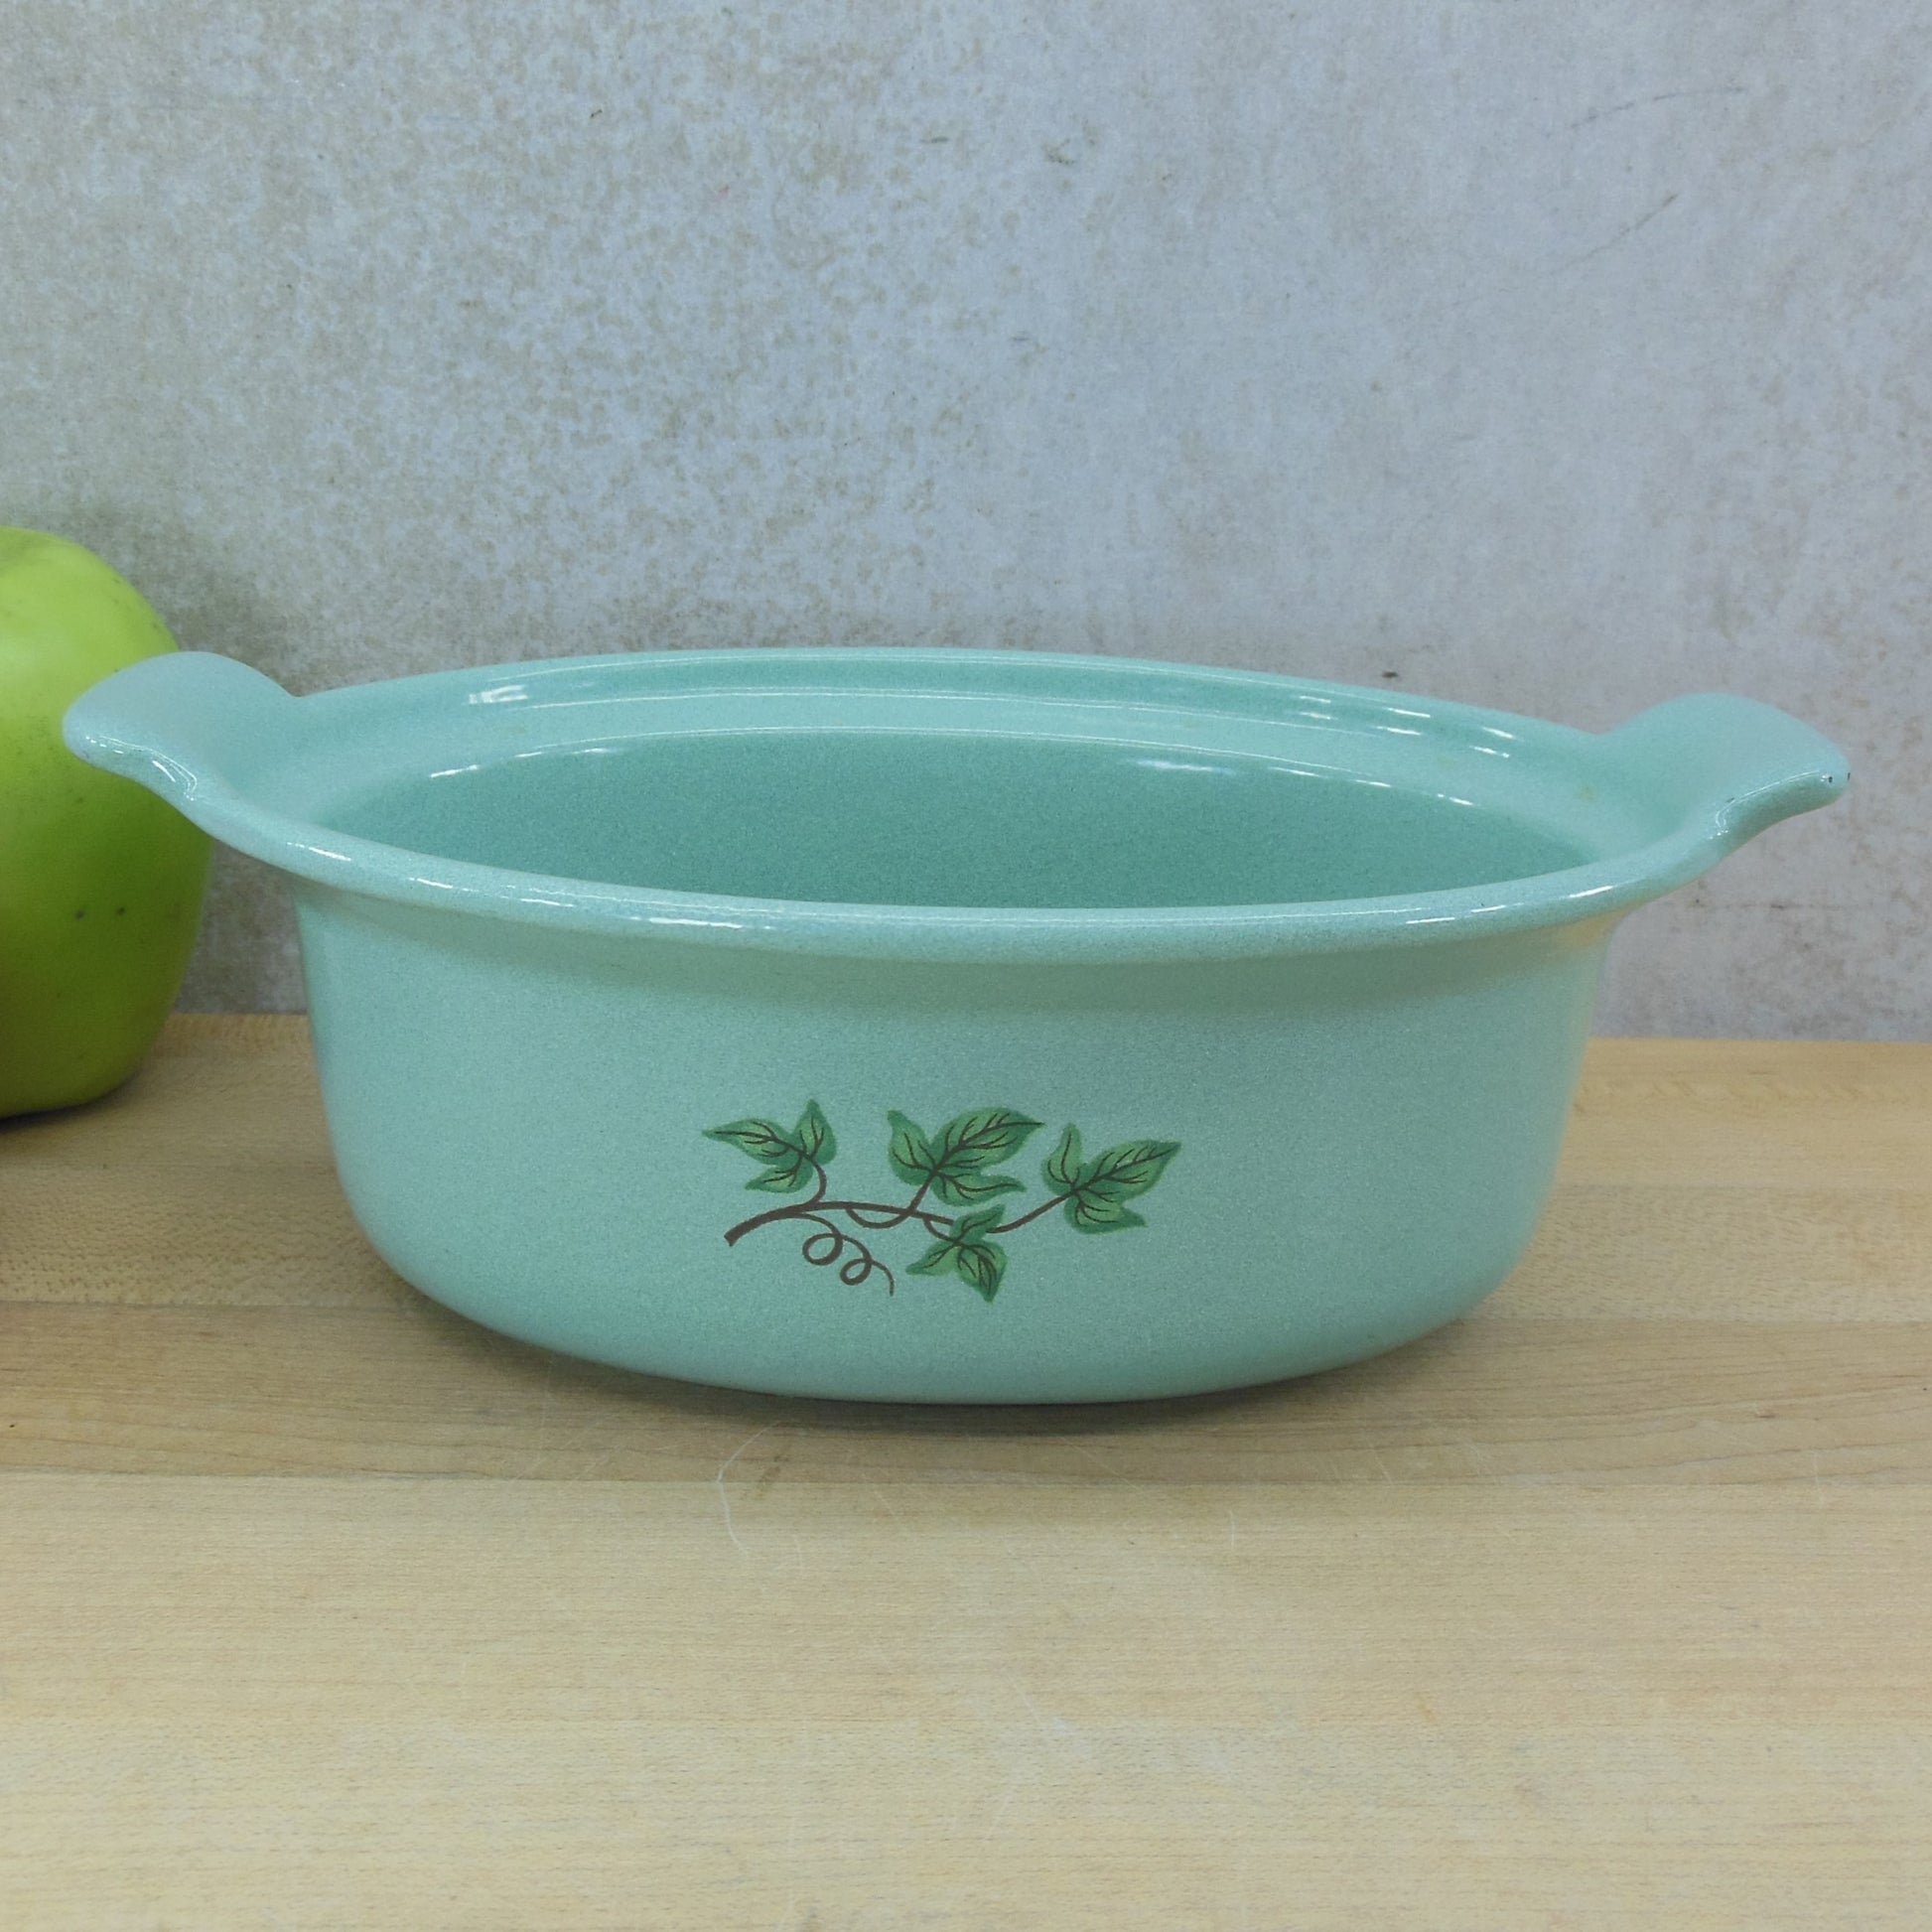 Prizer-Ware USA Ivy Turquoise Cast Iron Small Oval Casserole - No Lid